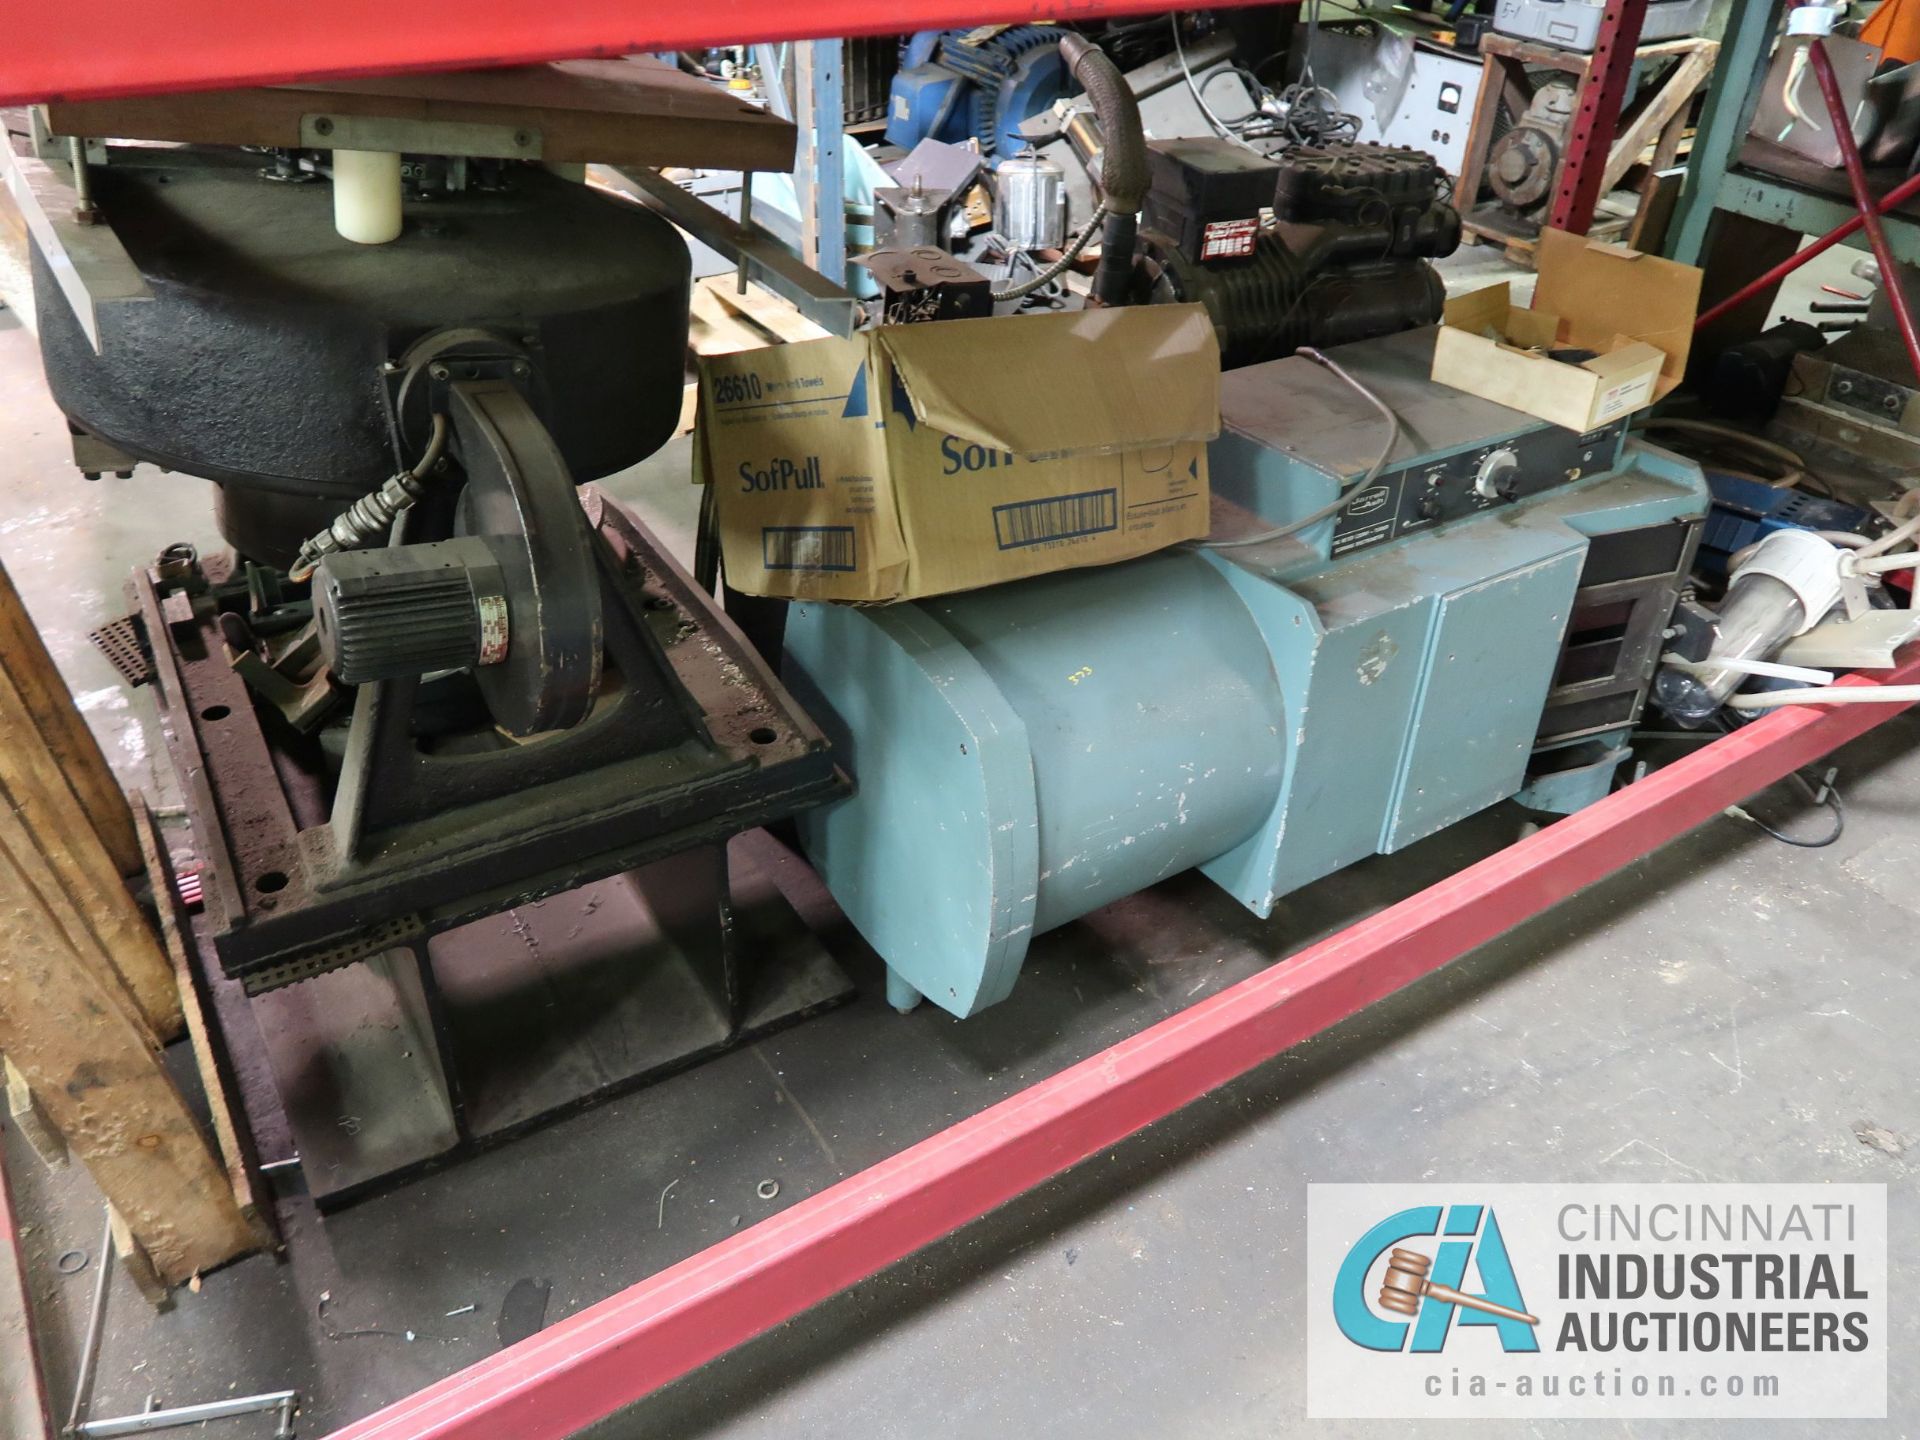 (LOT) MACHINE PARTS, COMPRESSORS, REDUCERS, GEARS, MOTORS, AND OTHER (4) SECTIONS RACK - Image 19 of 28